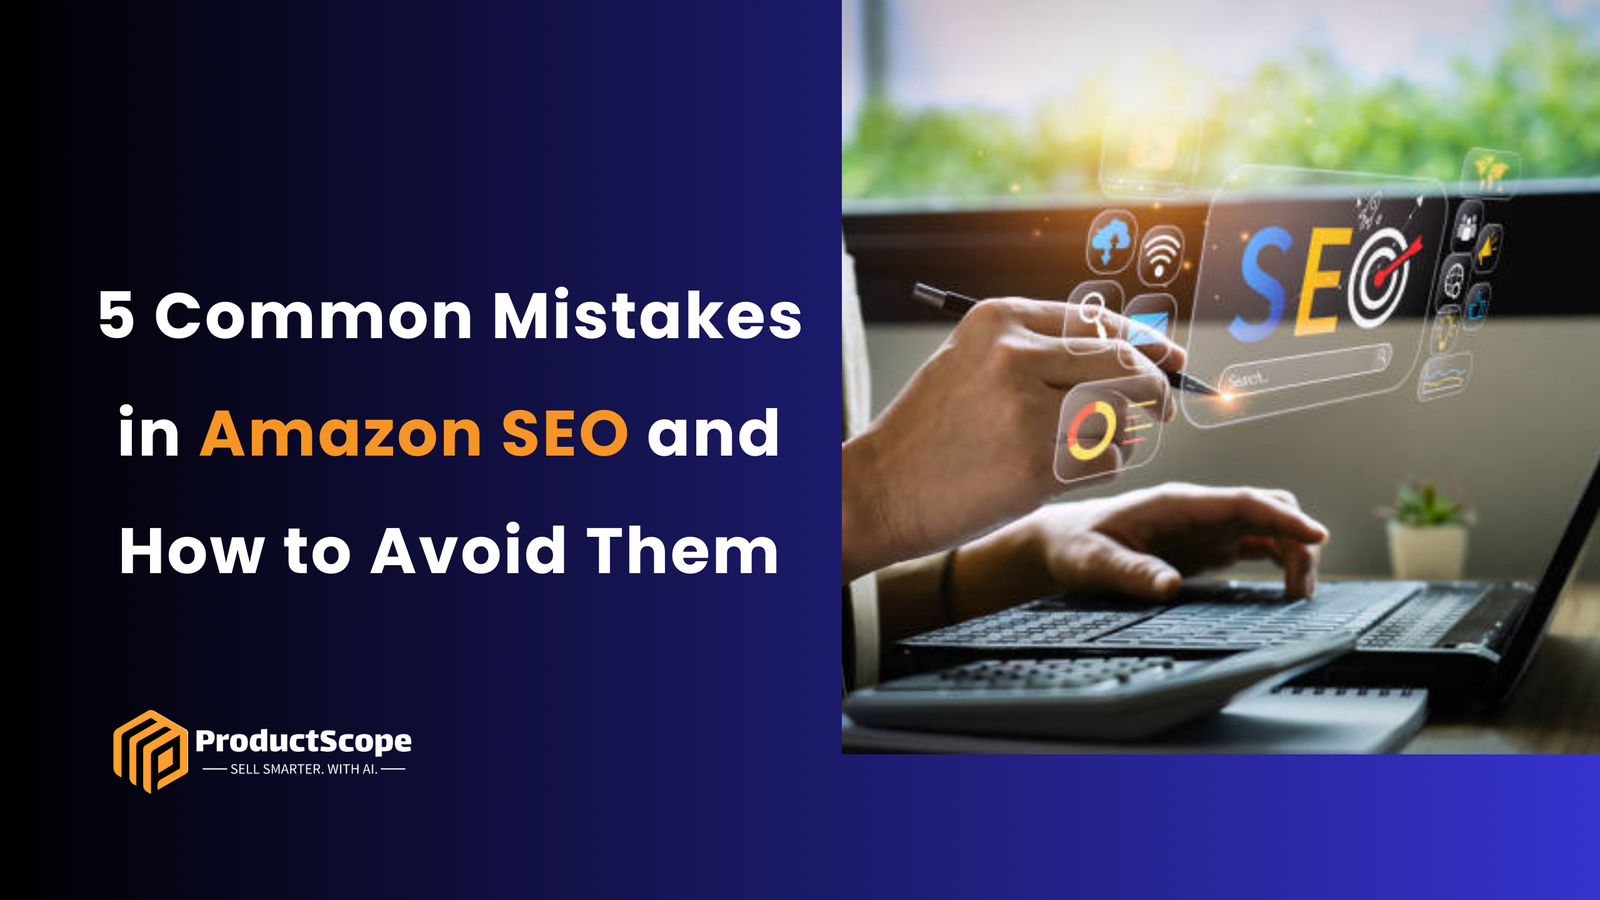 5 Common Mistakes in Amazon SEO and How to Avoid Them